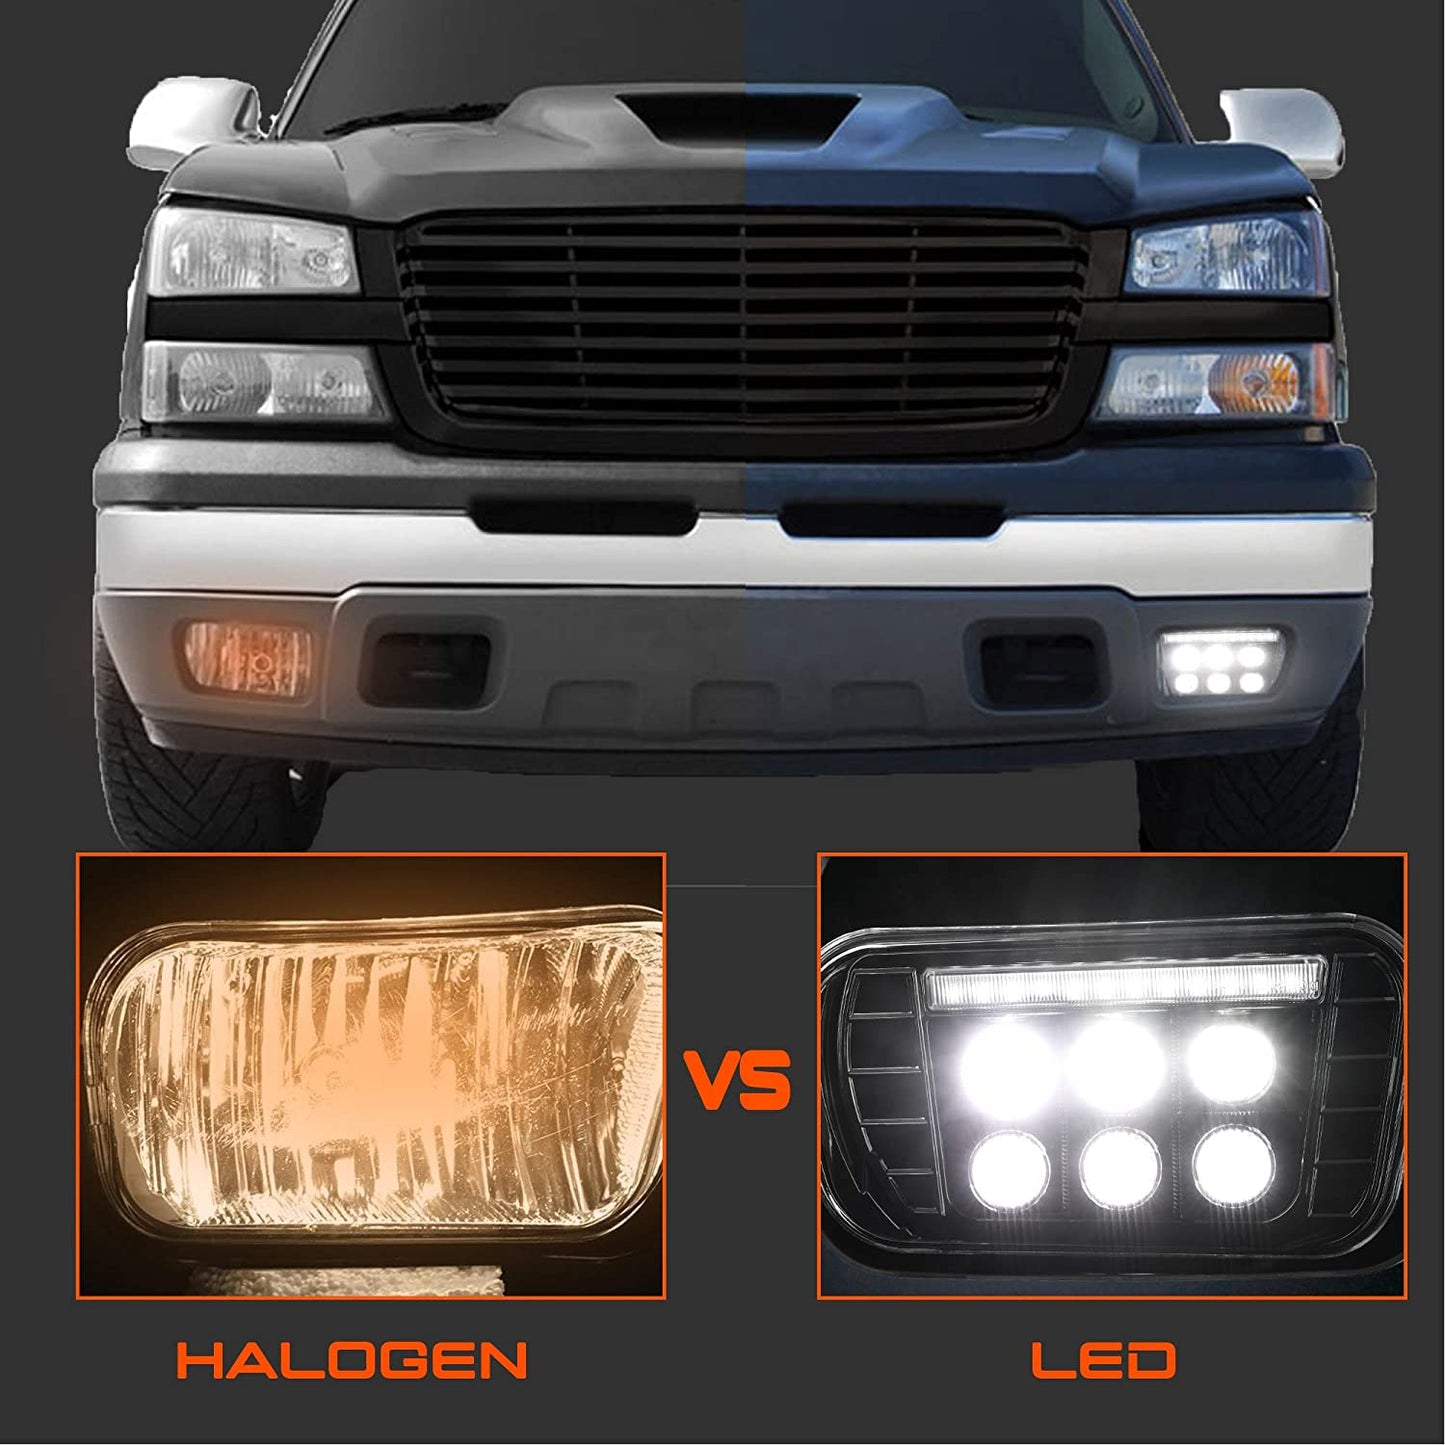 LED Fog Lights with DRL for Chevy Silverado 1500/2500HD/3500HD 2003-2006